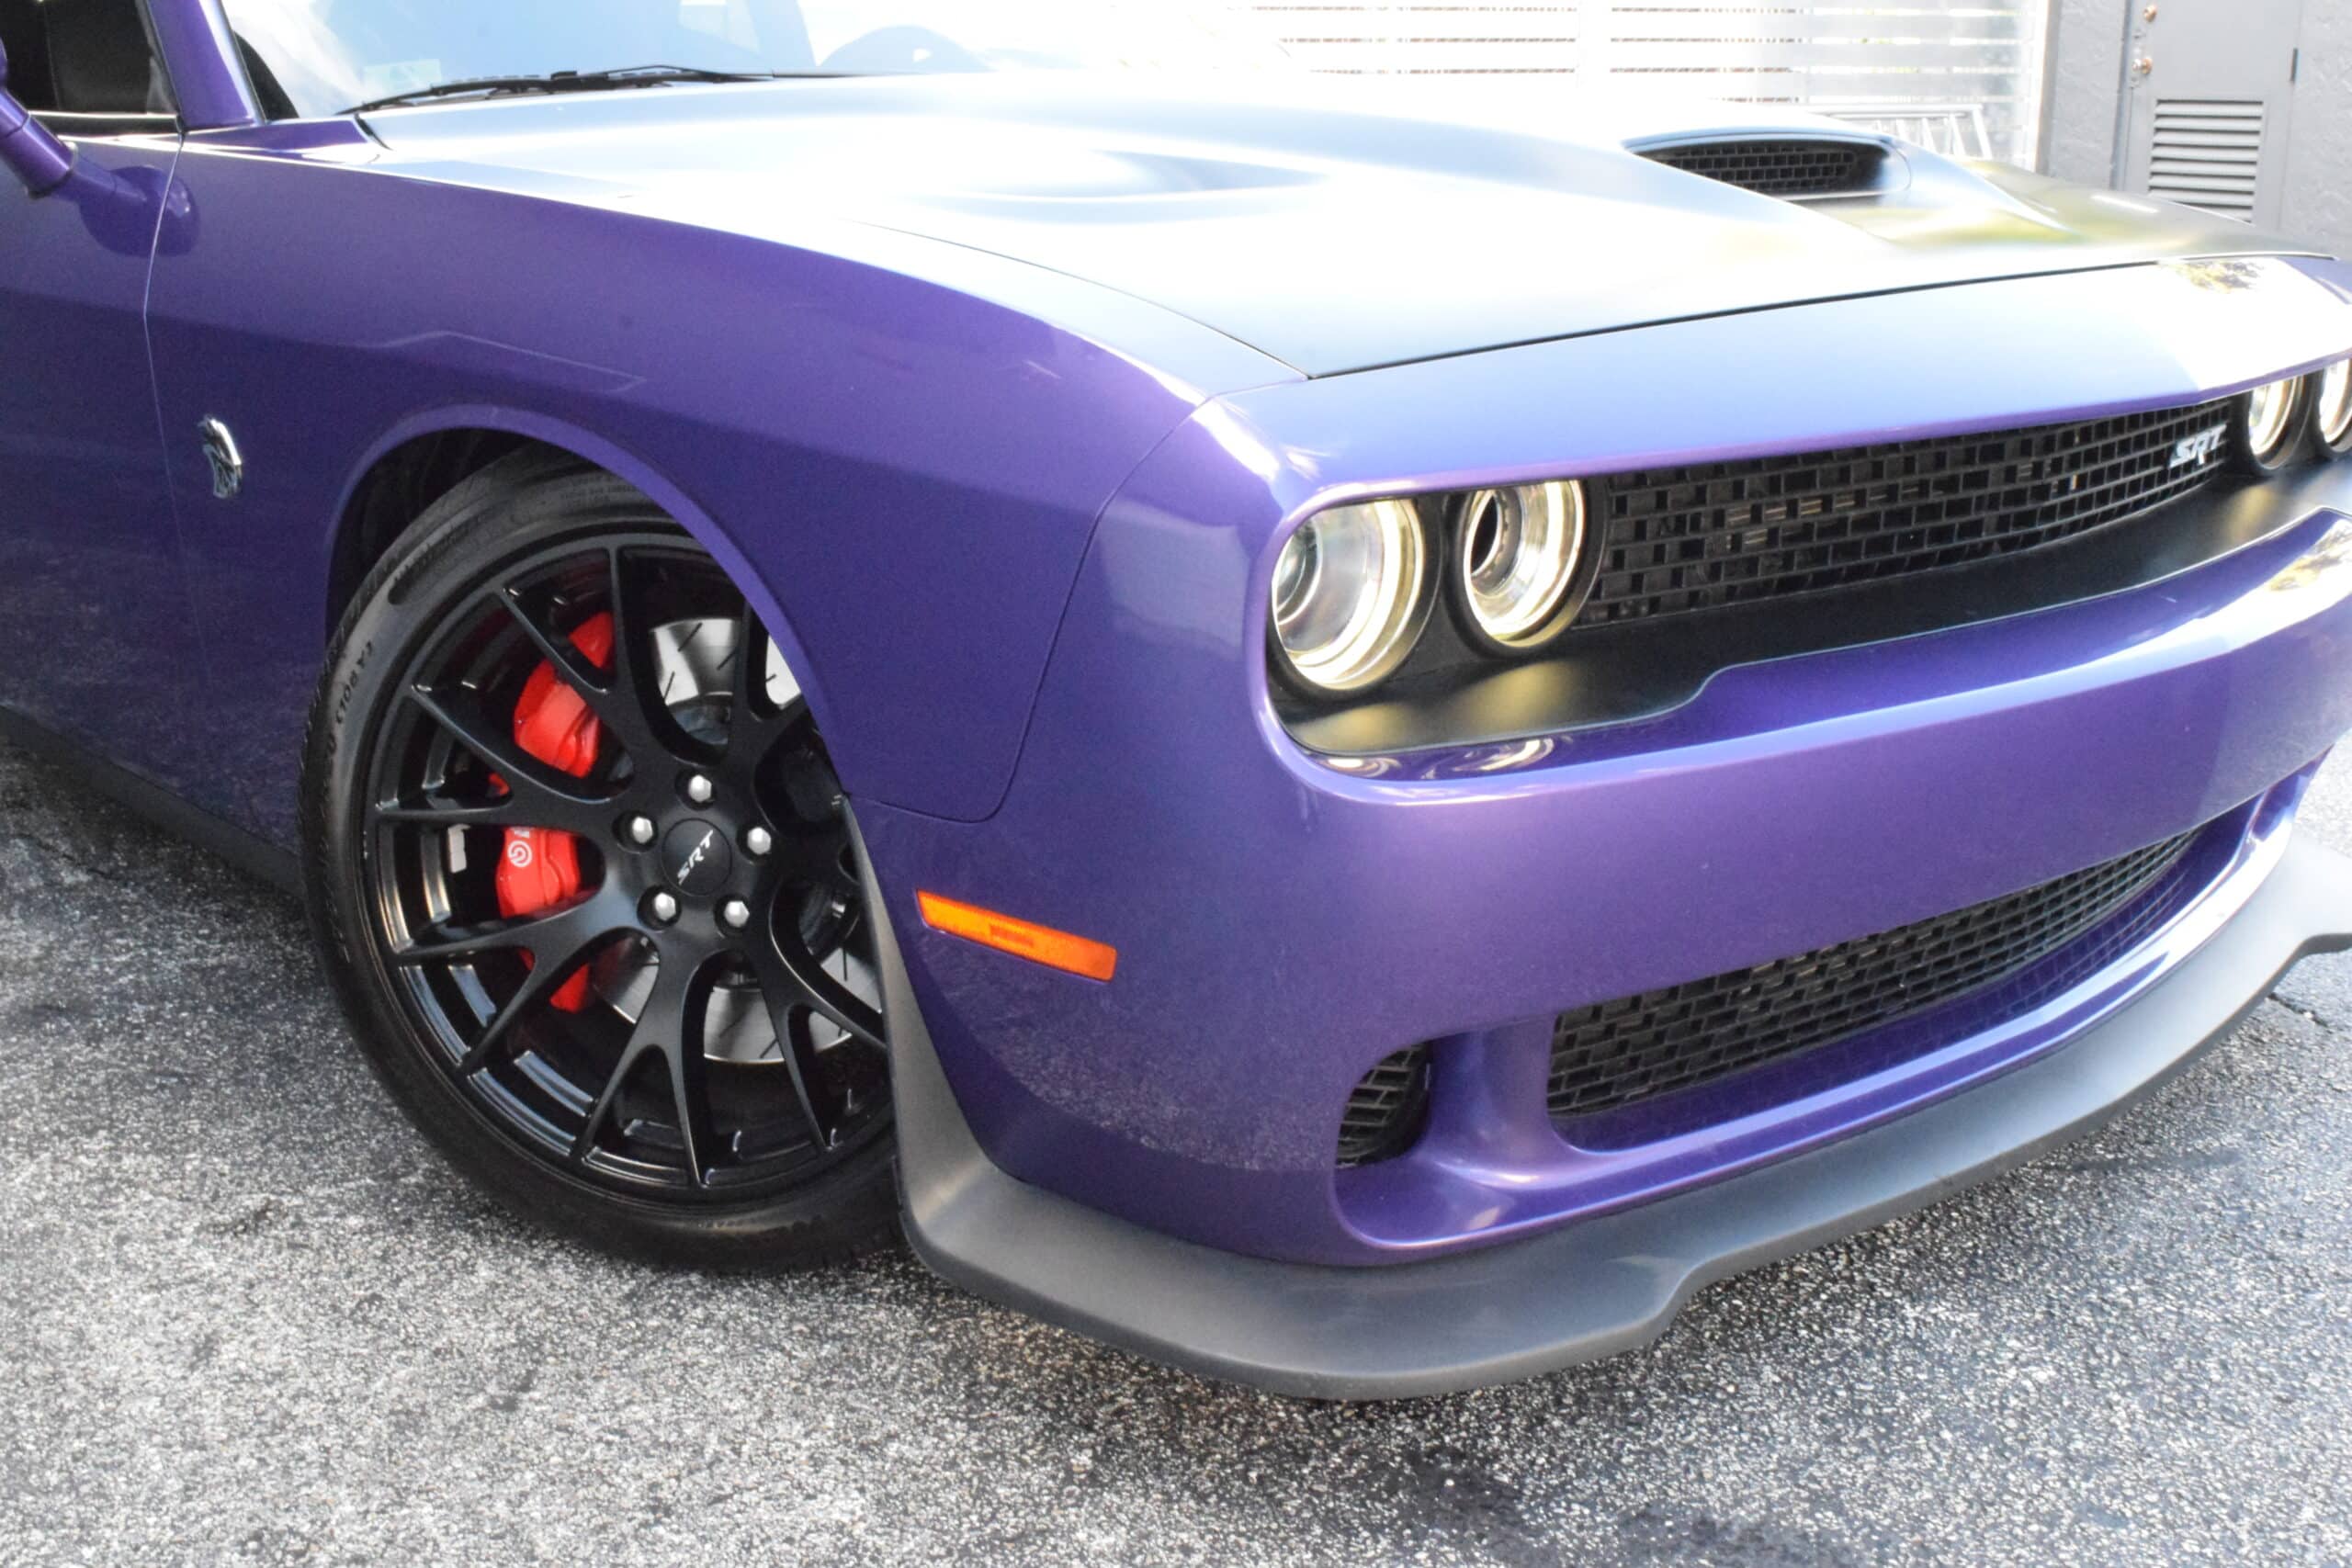 2016 Dodge Challenger SRT HELLCAT Supercharged HEMI ONLY 14K MILES! Plum Crazy Pearl- Corsa Exhaust – FULLY LOADED -HEMI 26R Package